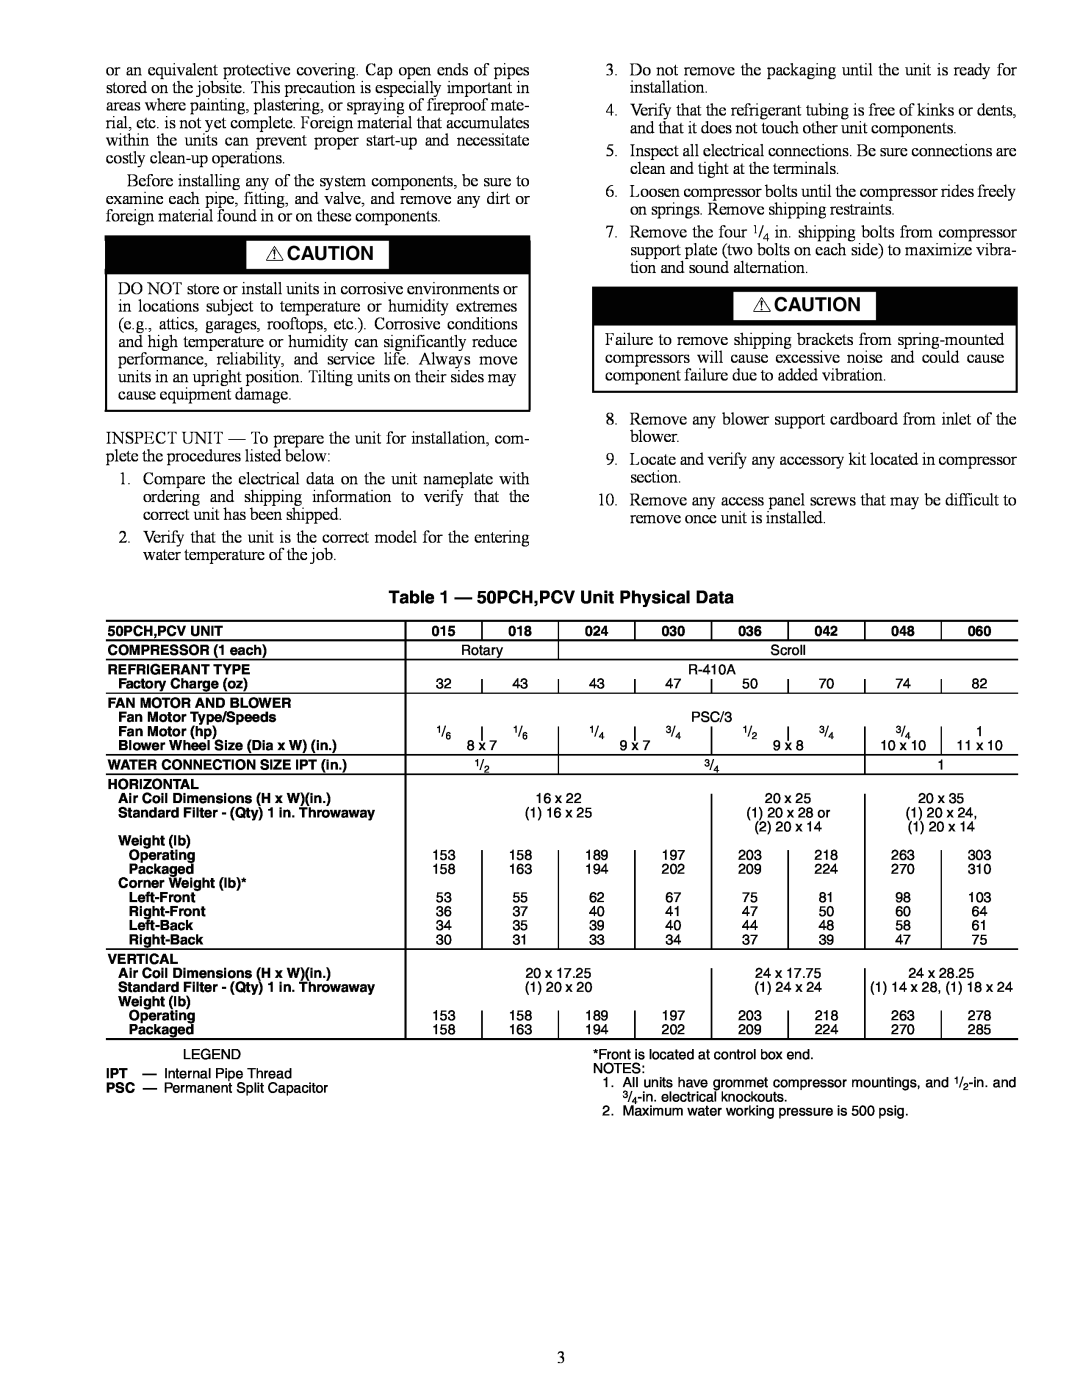 Carrier PCV015-060 specifications 50PCH,PCV Unit Physical Data 